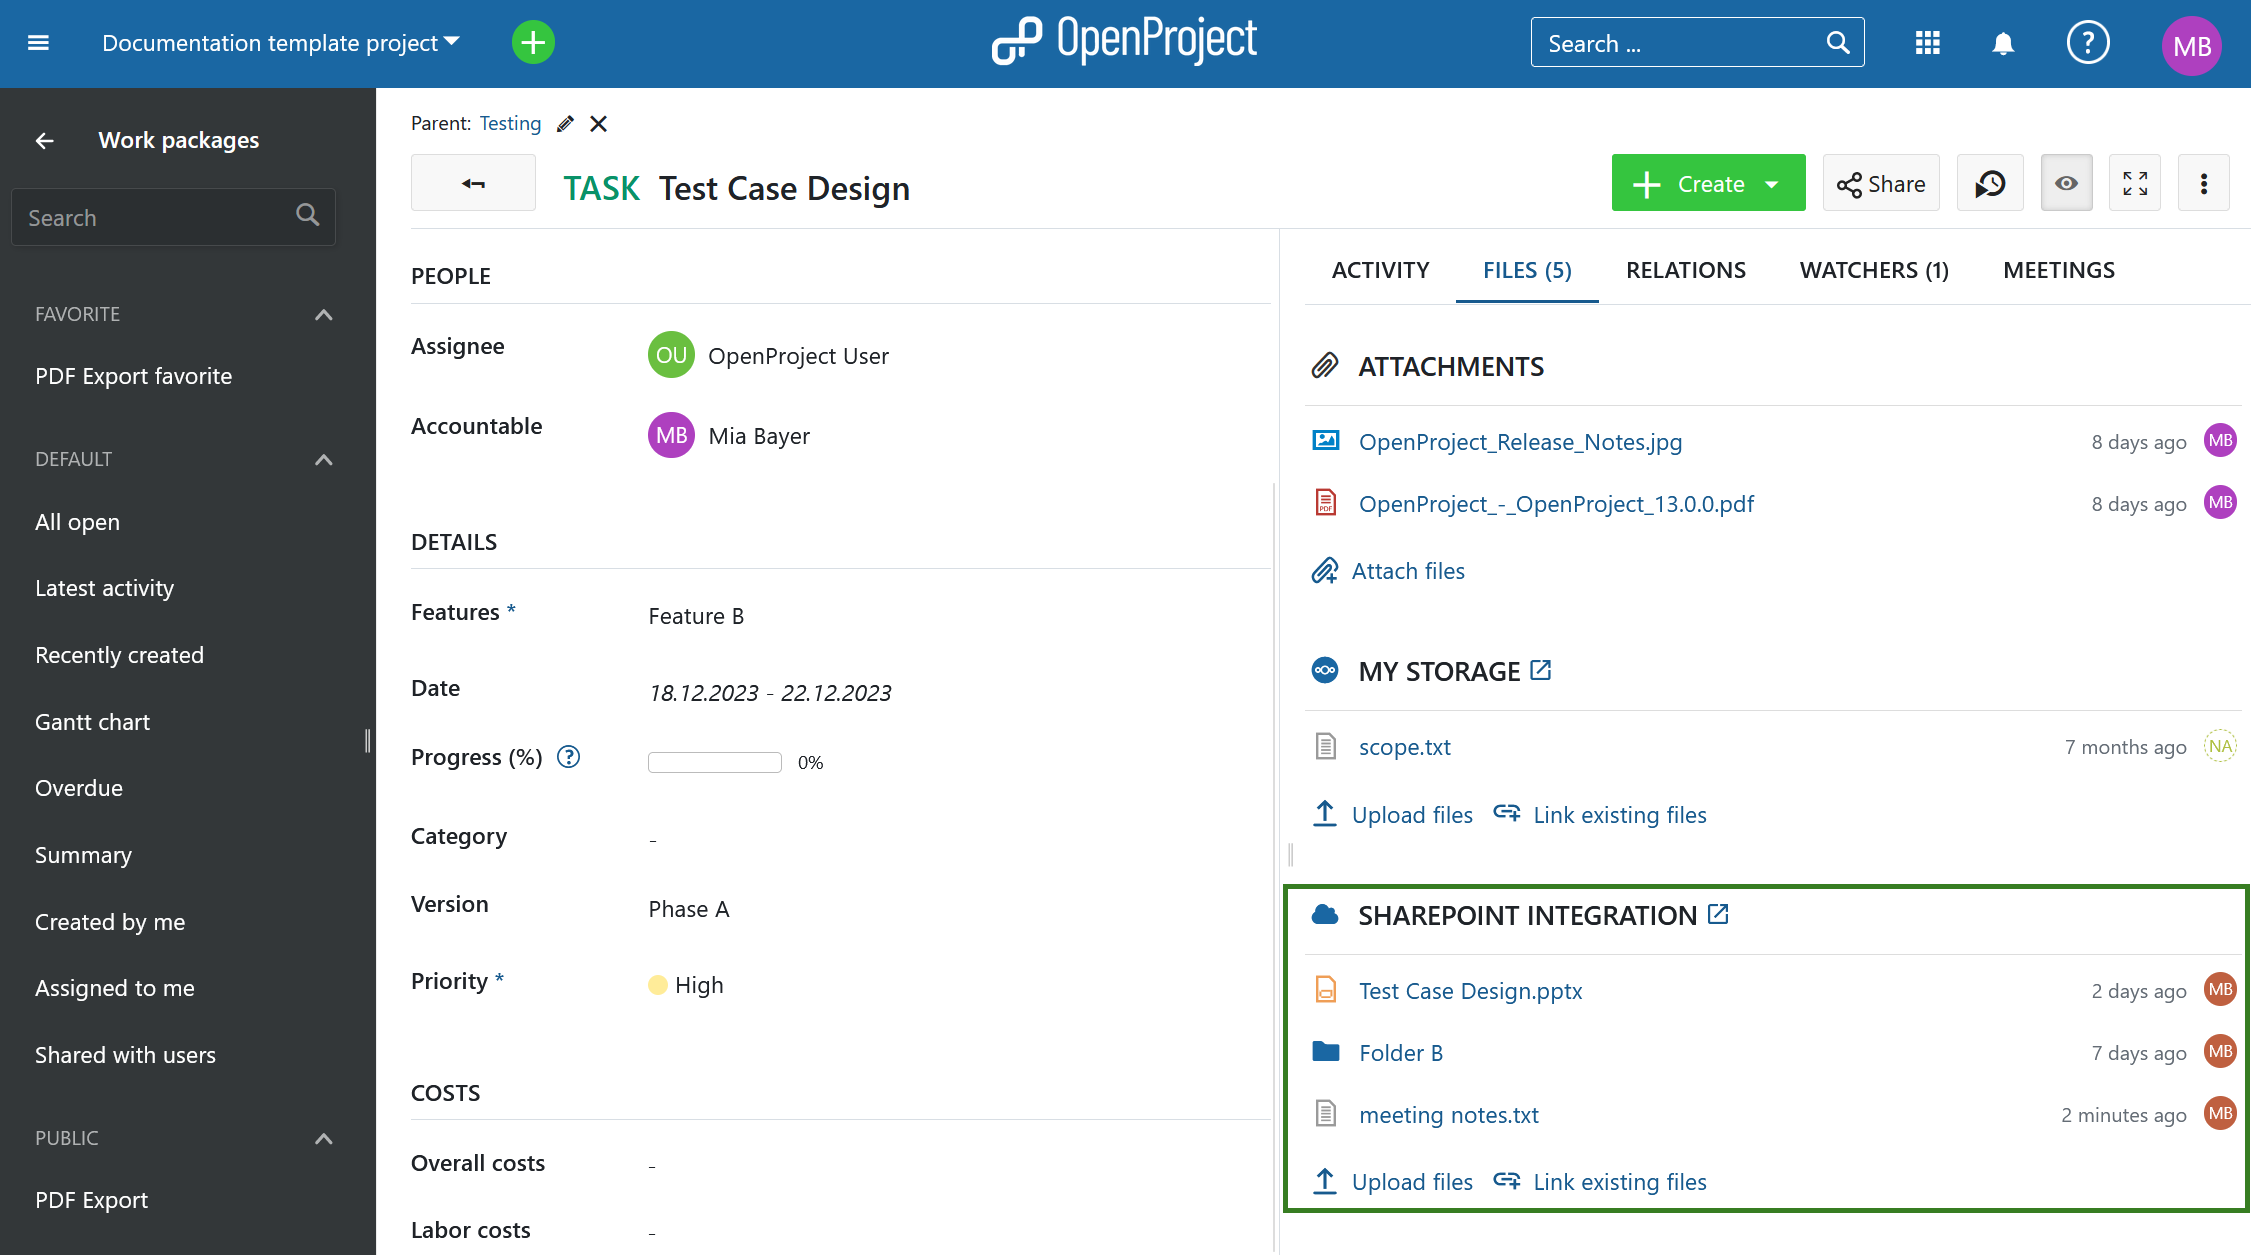 Screenshot of the new SharePoint integration coming with OpenProject 13.1